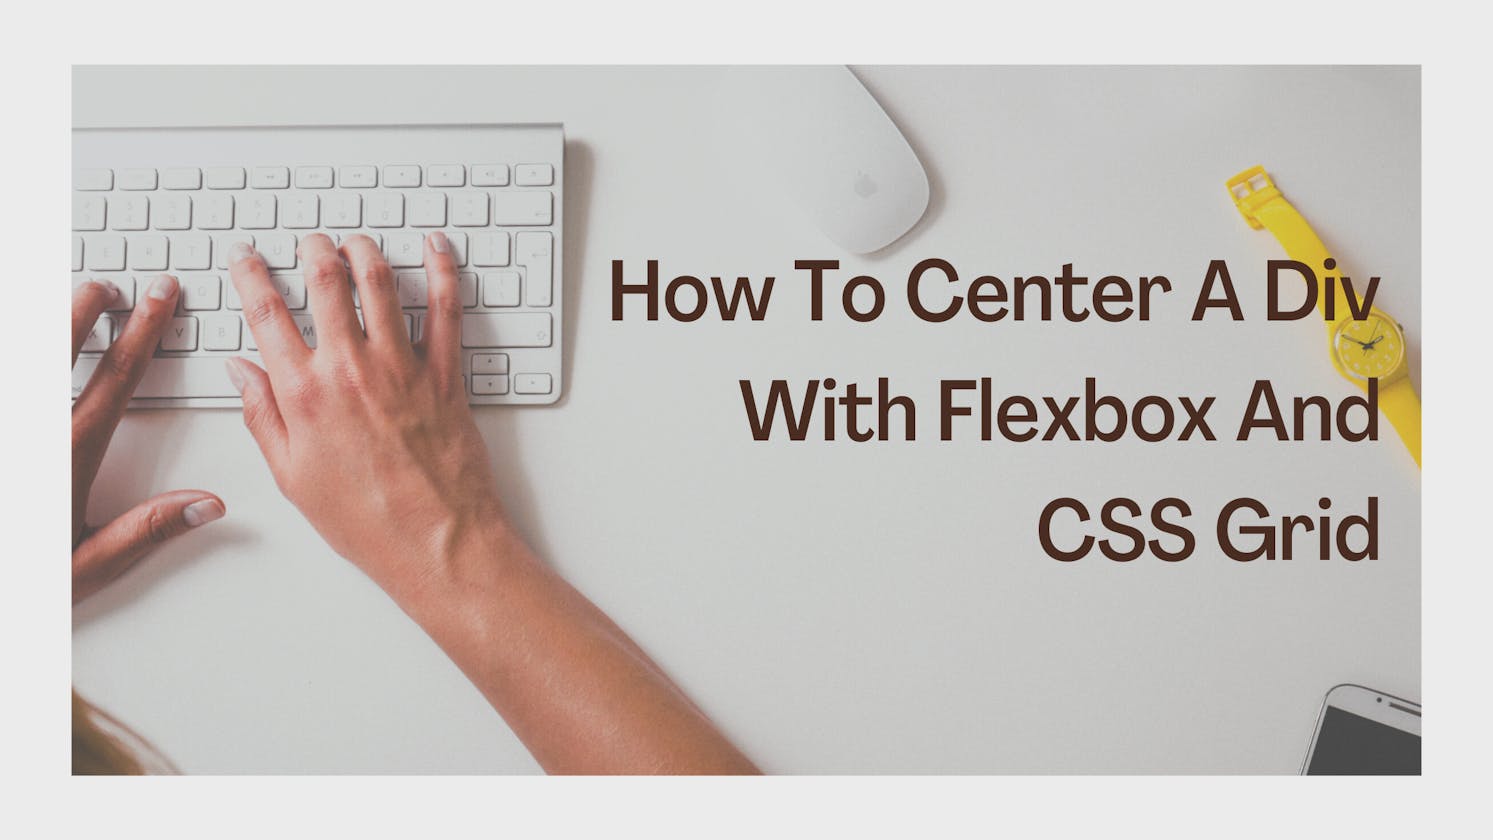 How to Center a Div with Flex box and CSS Grid